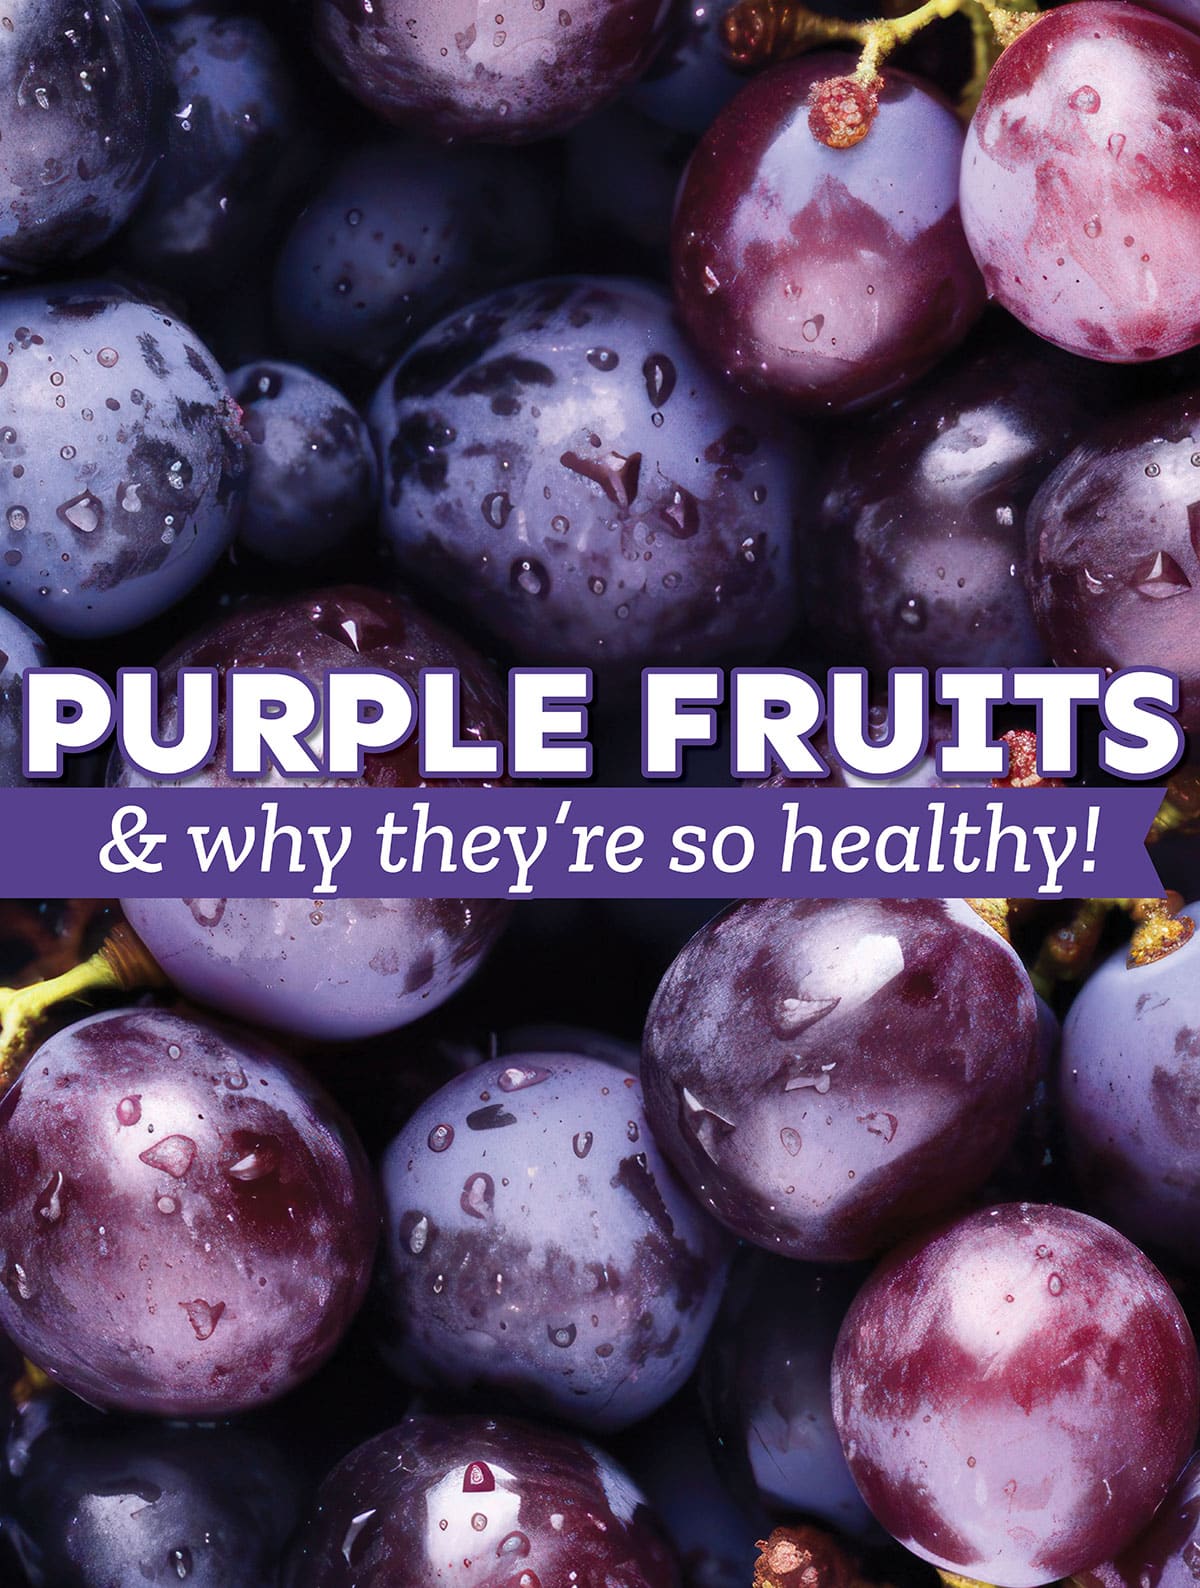 Collage that says "purple fruits".